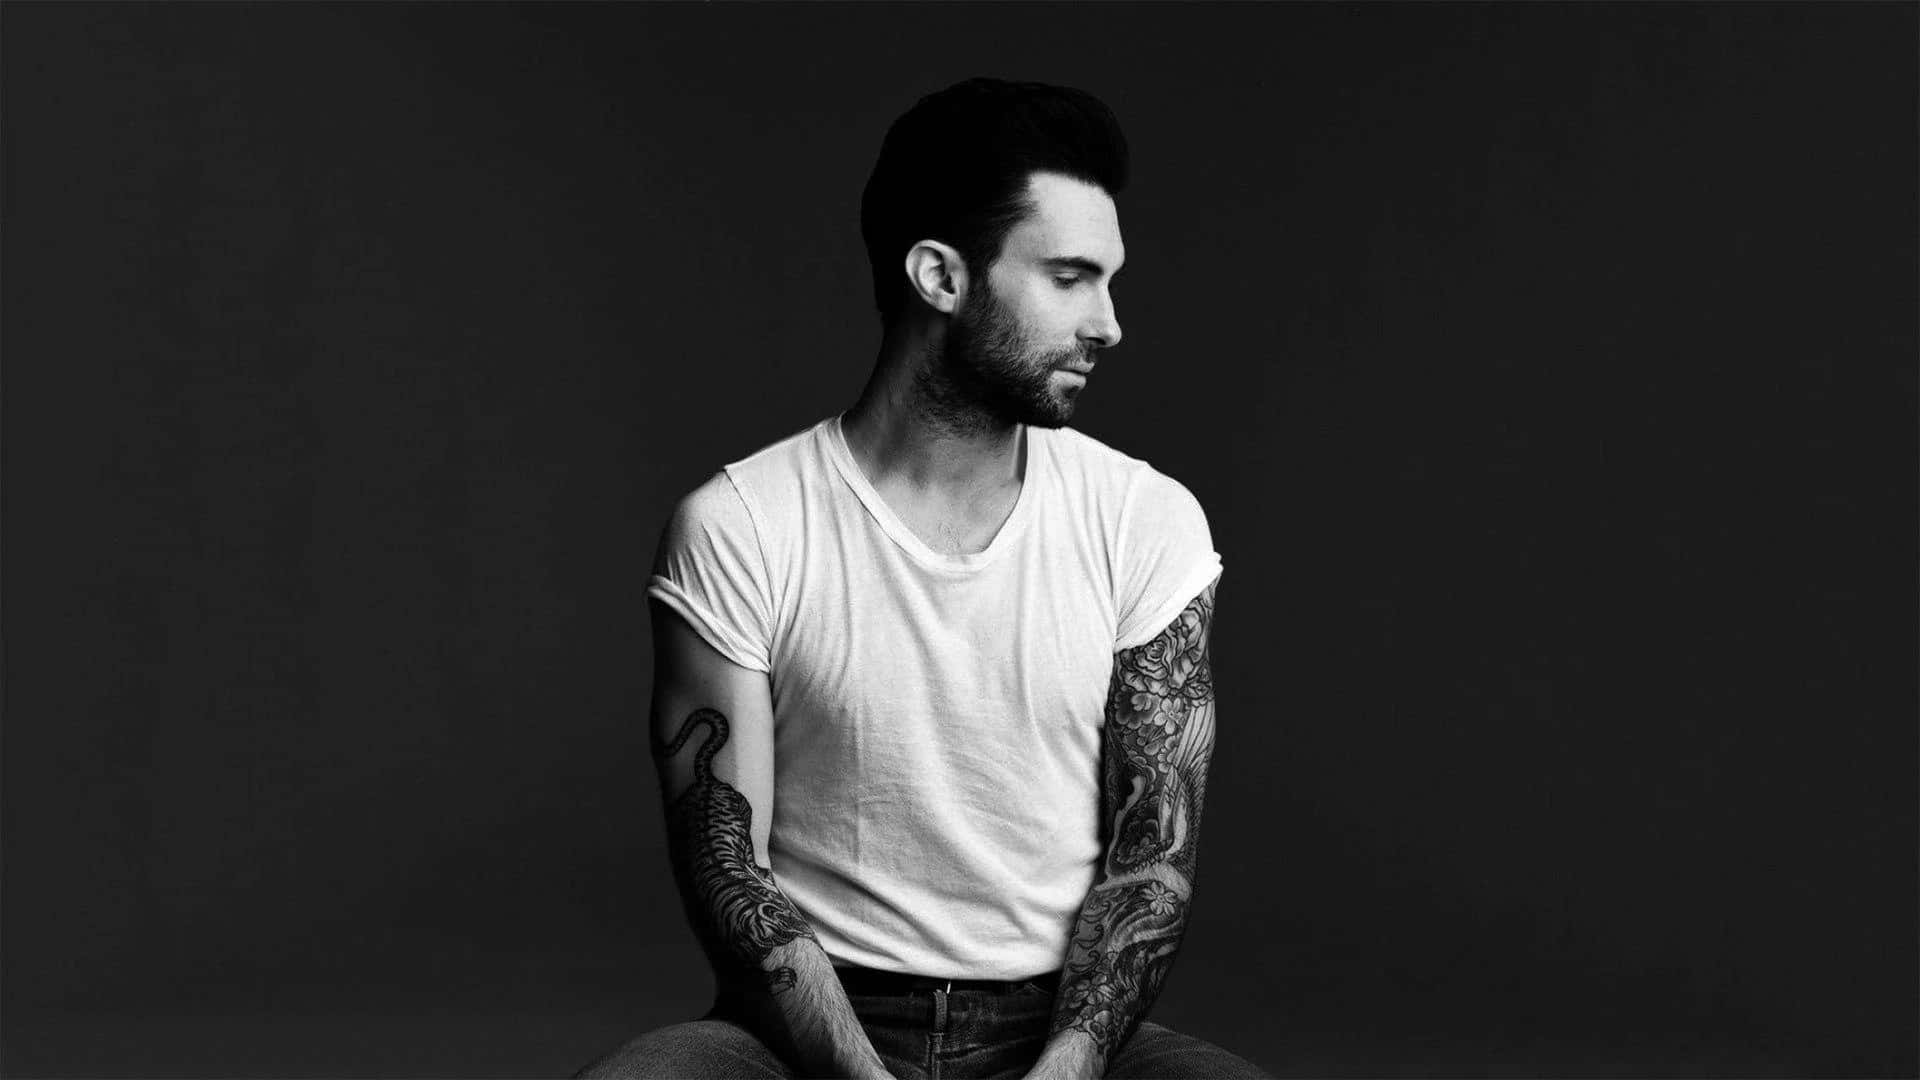 Singer and songwriter Adam Levine at an awards ceremony.